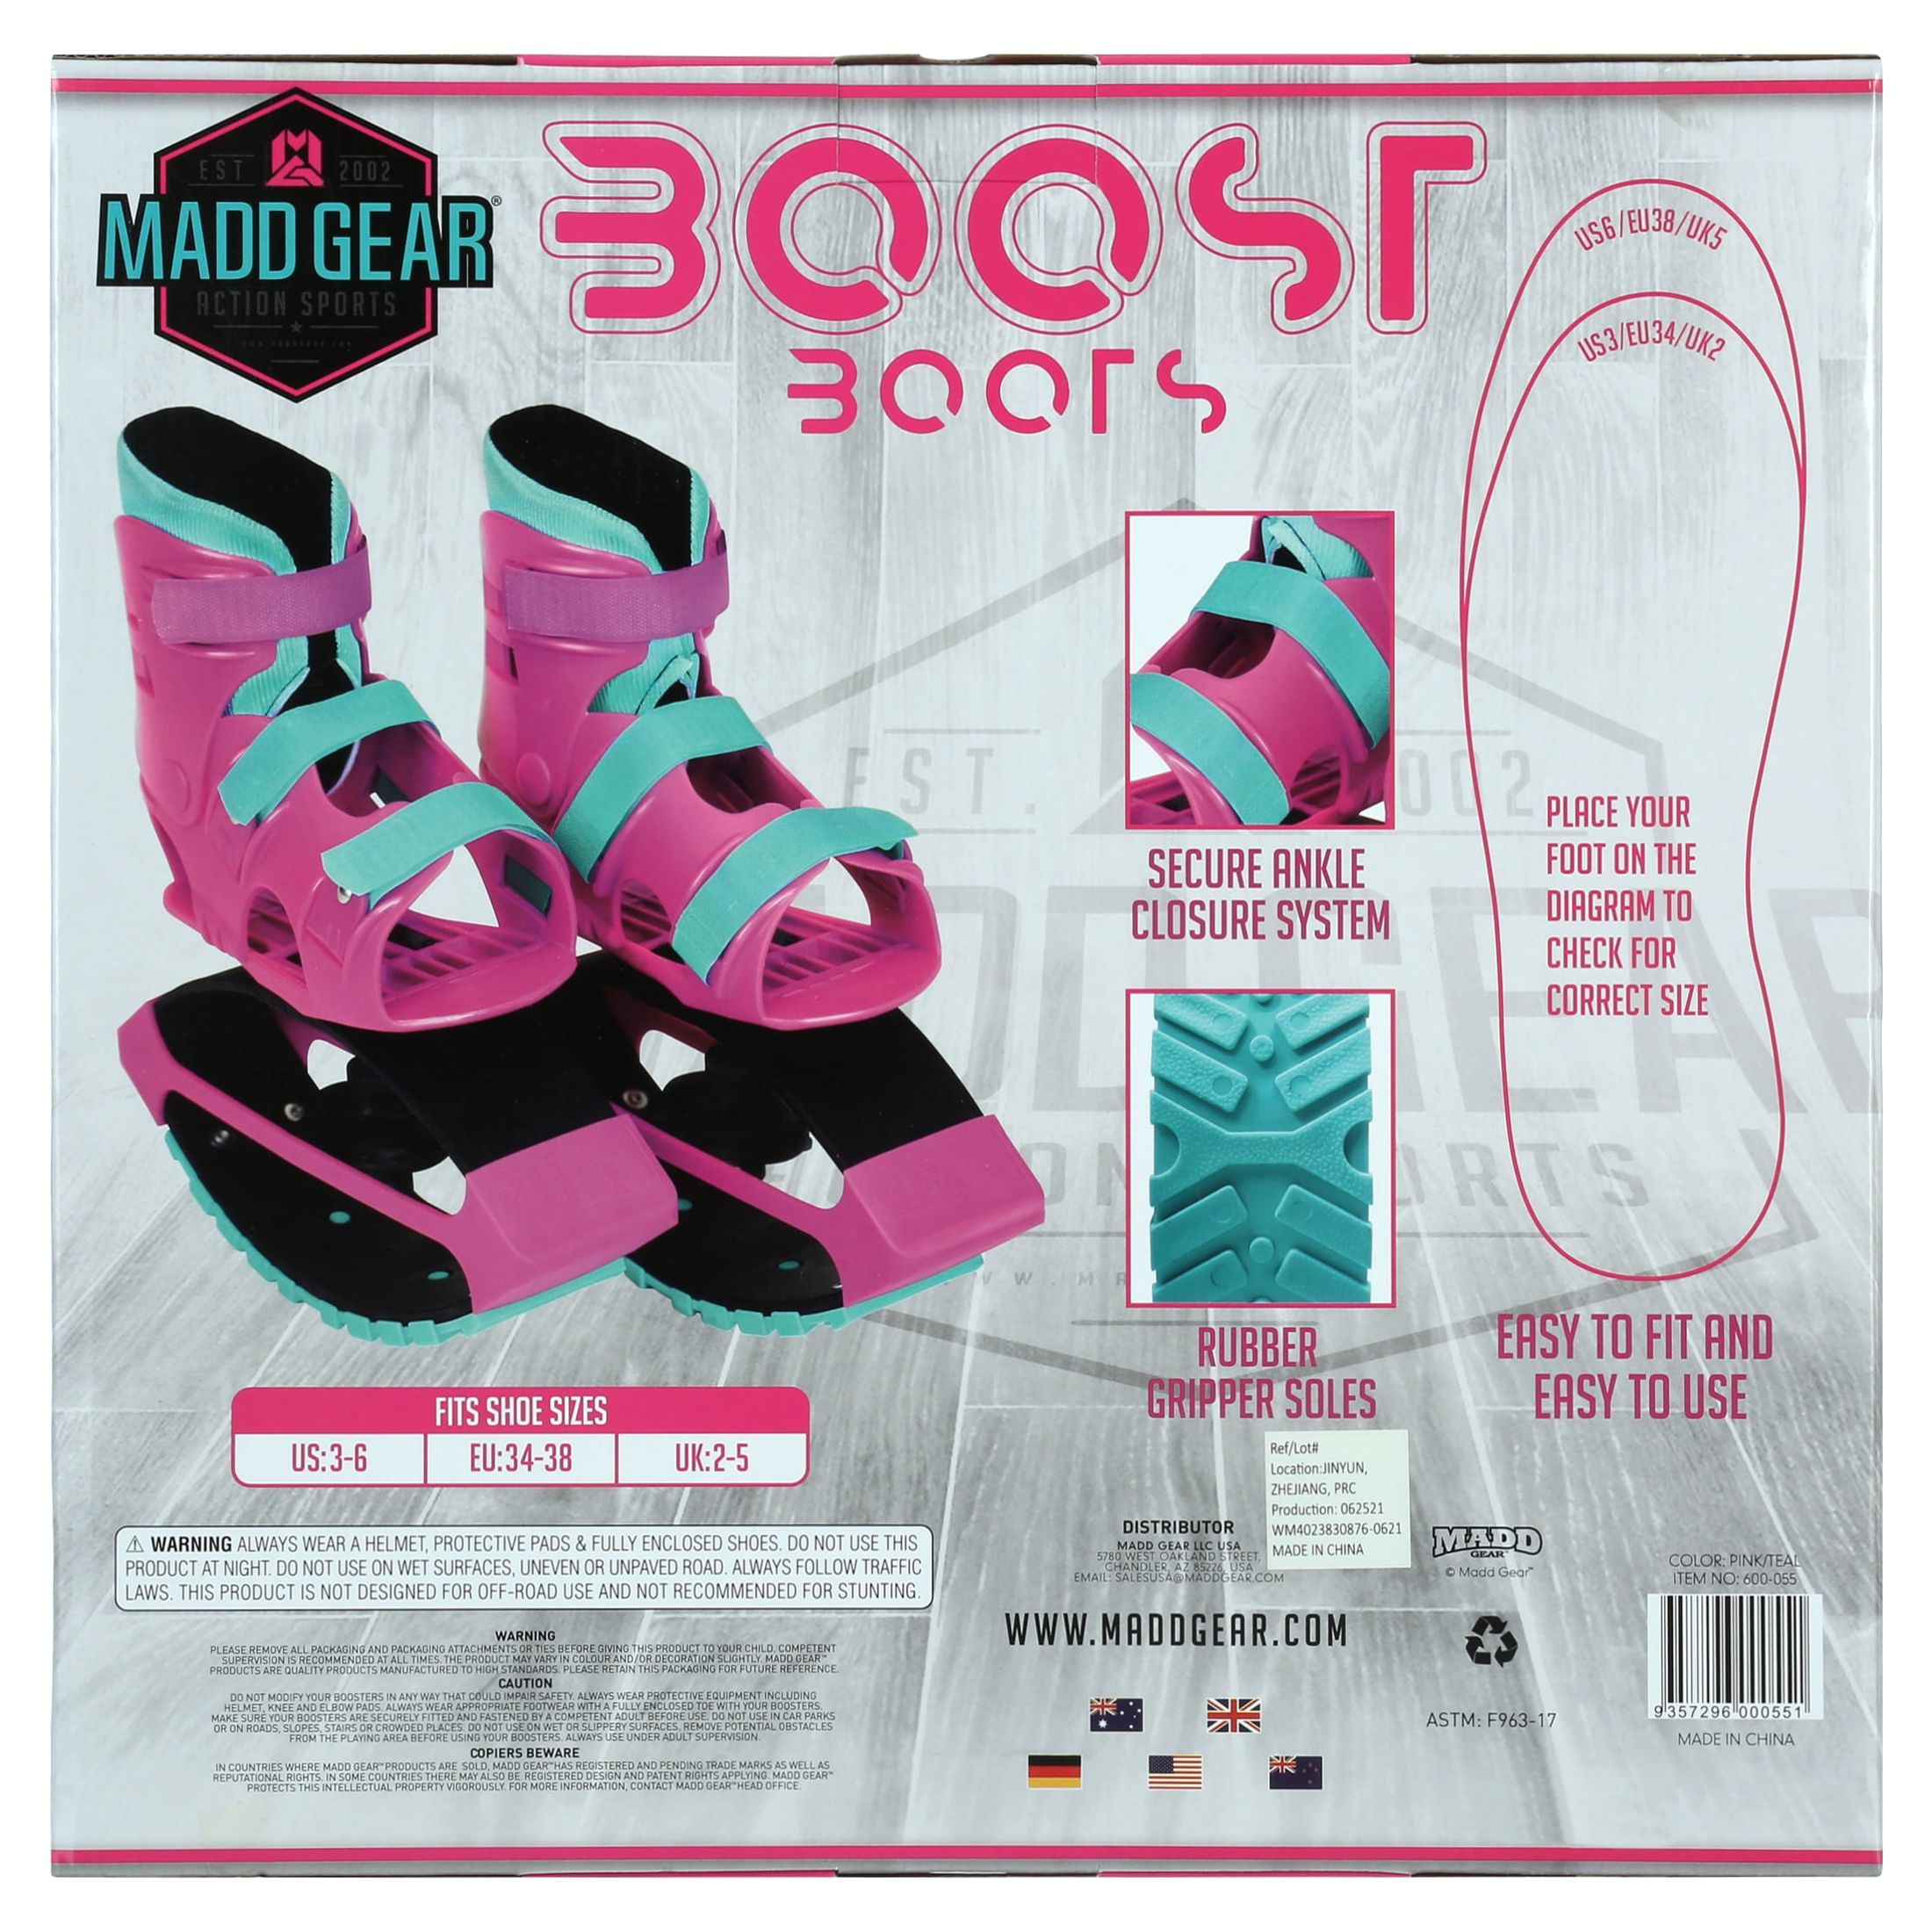 Madd Gear Light-Up Boost Boots - Purple/Teal - image 13 of 14